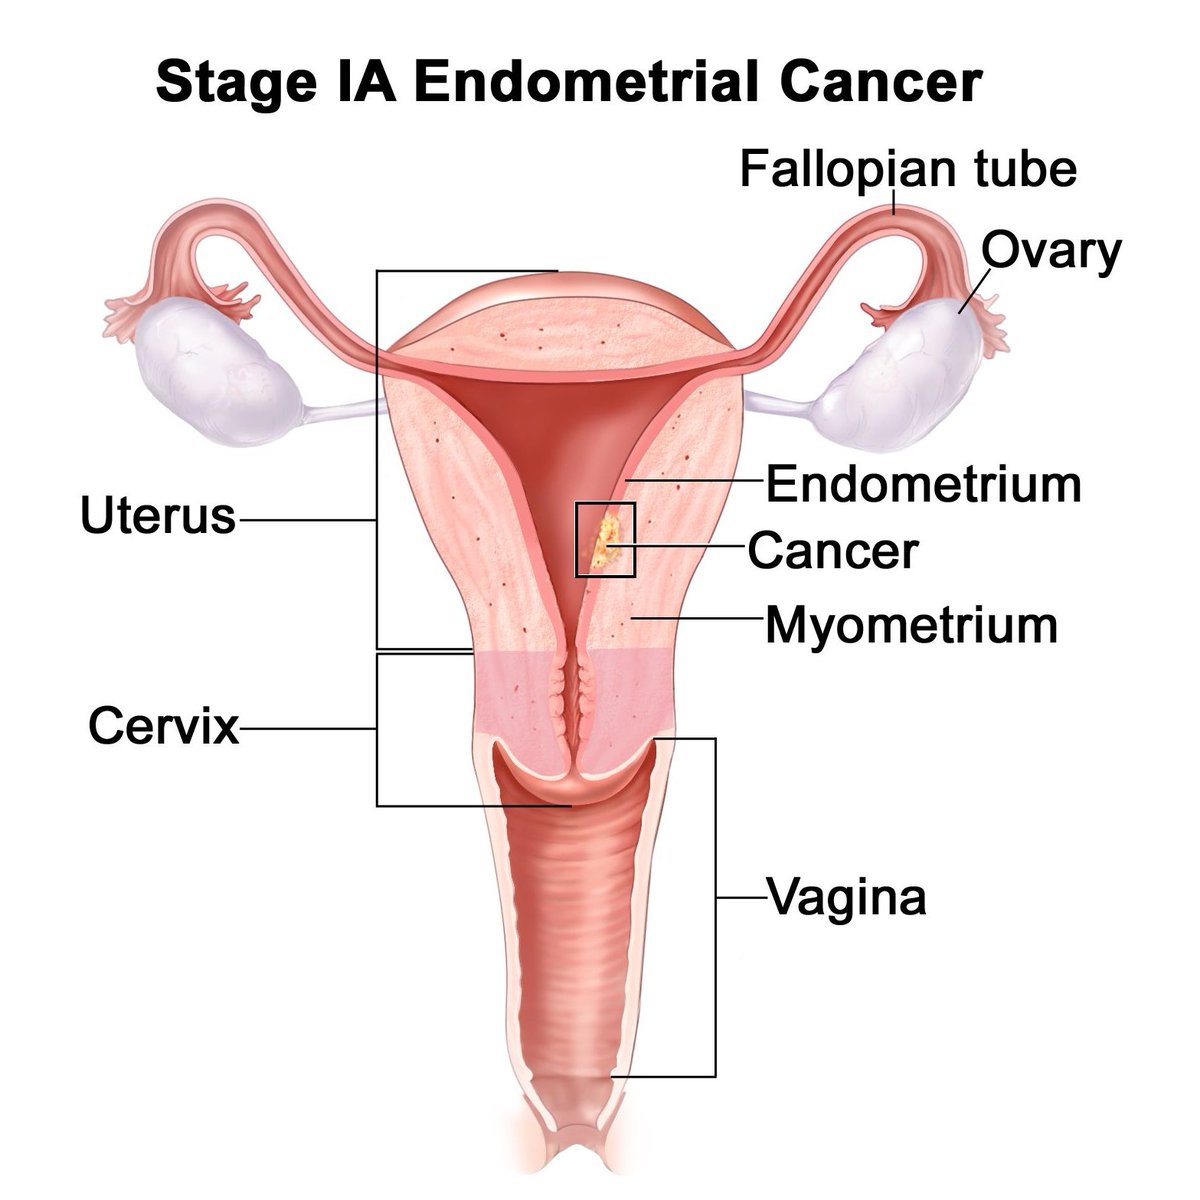 'Ursen, why did you get a hysterectomy?'

Well, I had Stage 1 Endometrial Cancer, it was caught early on. My Endometrium was too thick, I think it was 14 mm, and the internal lining was heterogeneous. Luckily, it was localized to a small area, so my surgery removed it entirely!